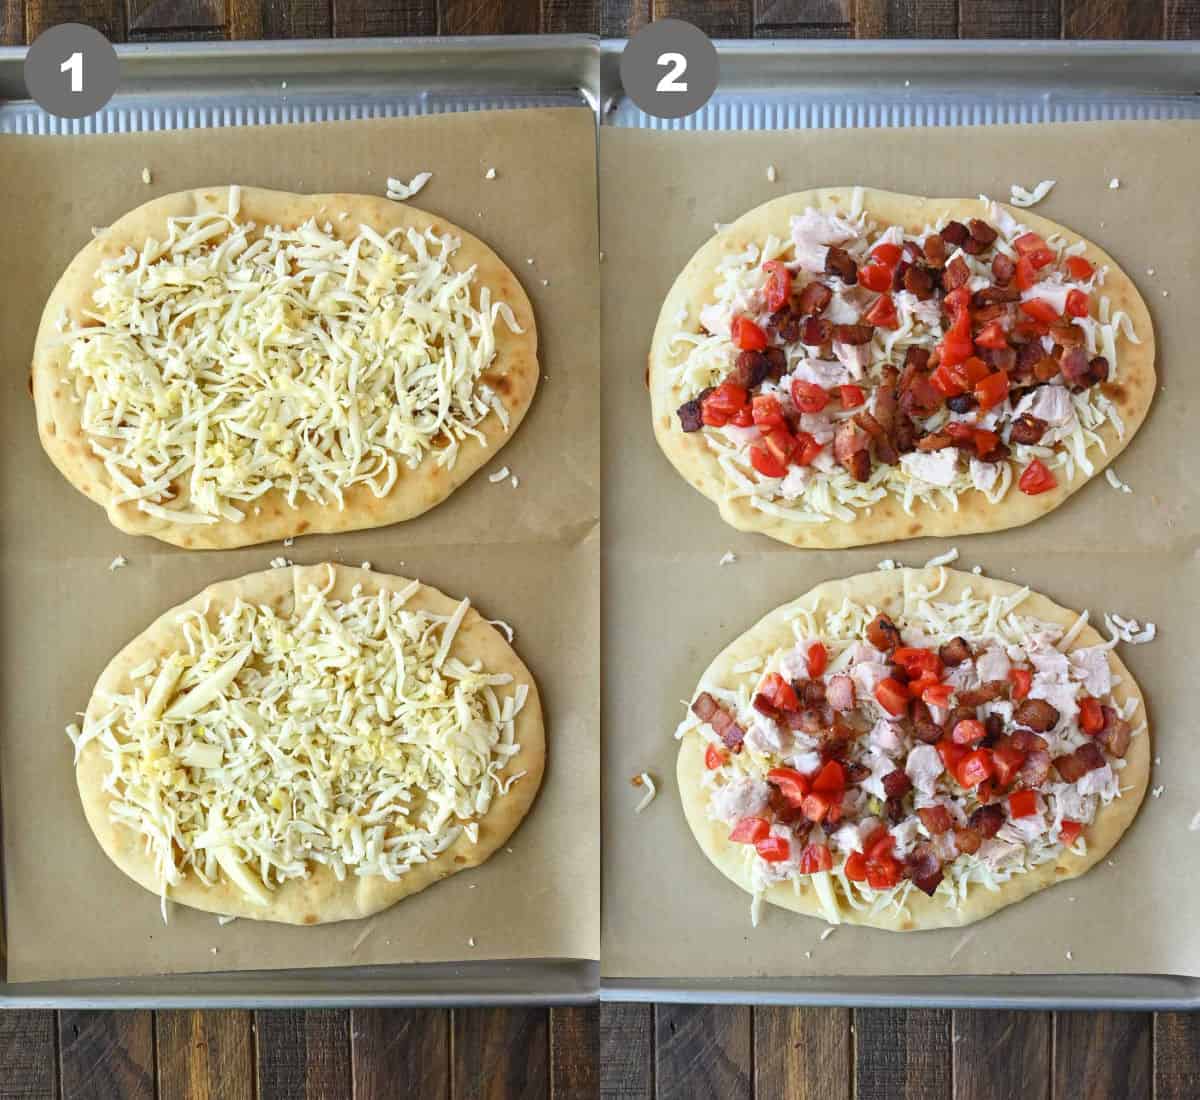 Flatbread on a baking sheet with cheese added, then chicken, bacon and tomatoes placed on top.